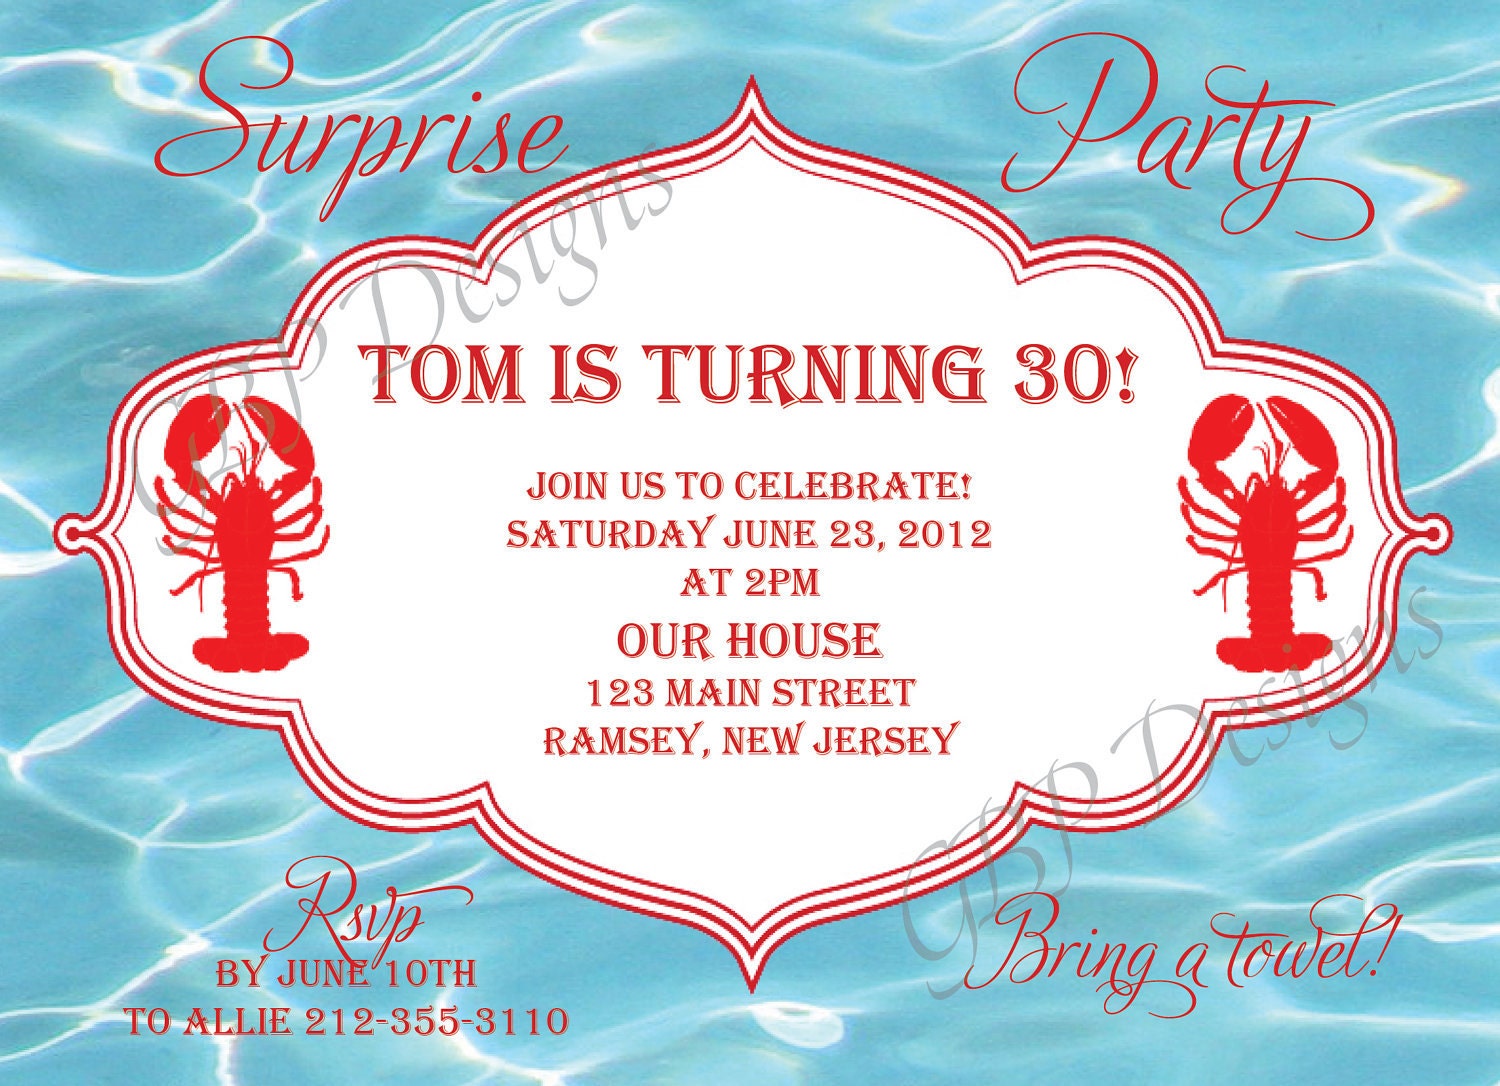 cool-clambake-or-pool-party-invitation-by-gbpdesigns-on-etsy